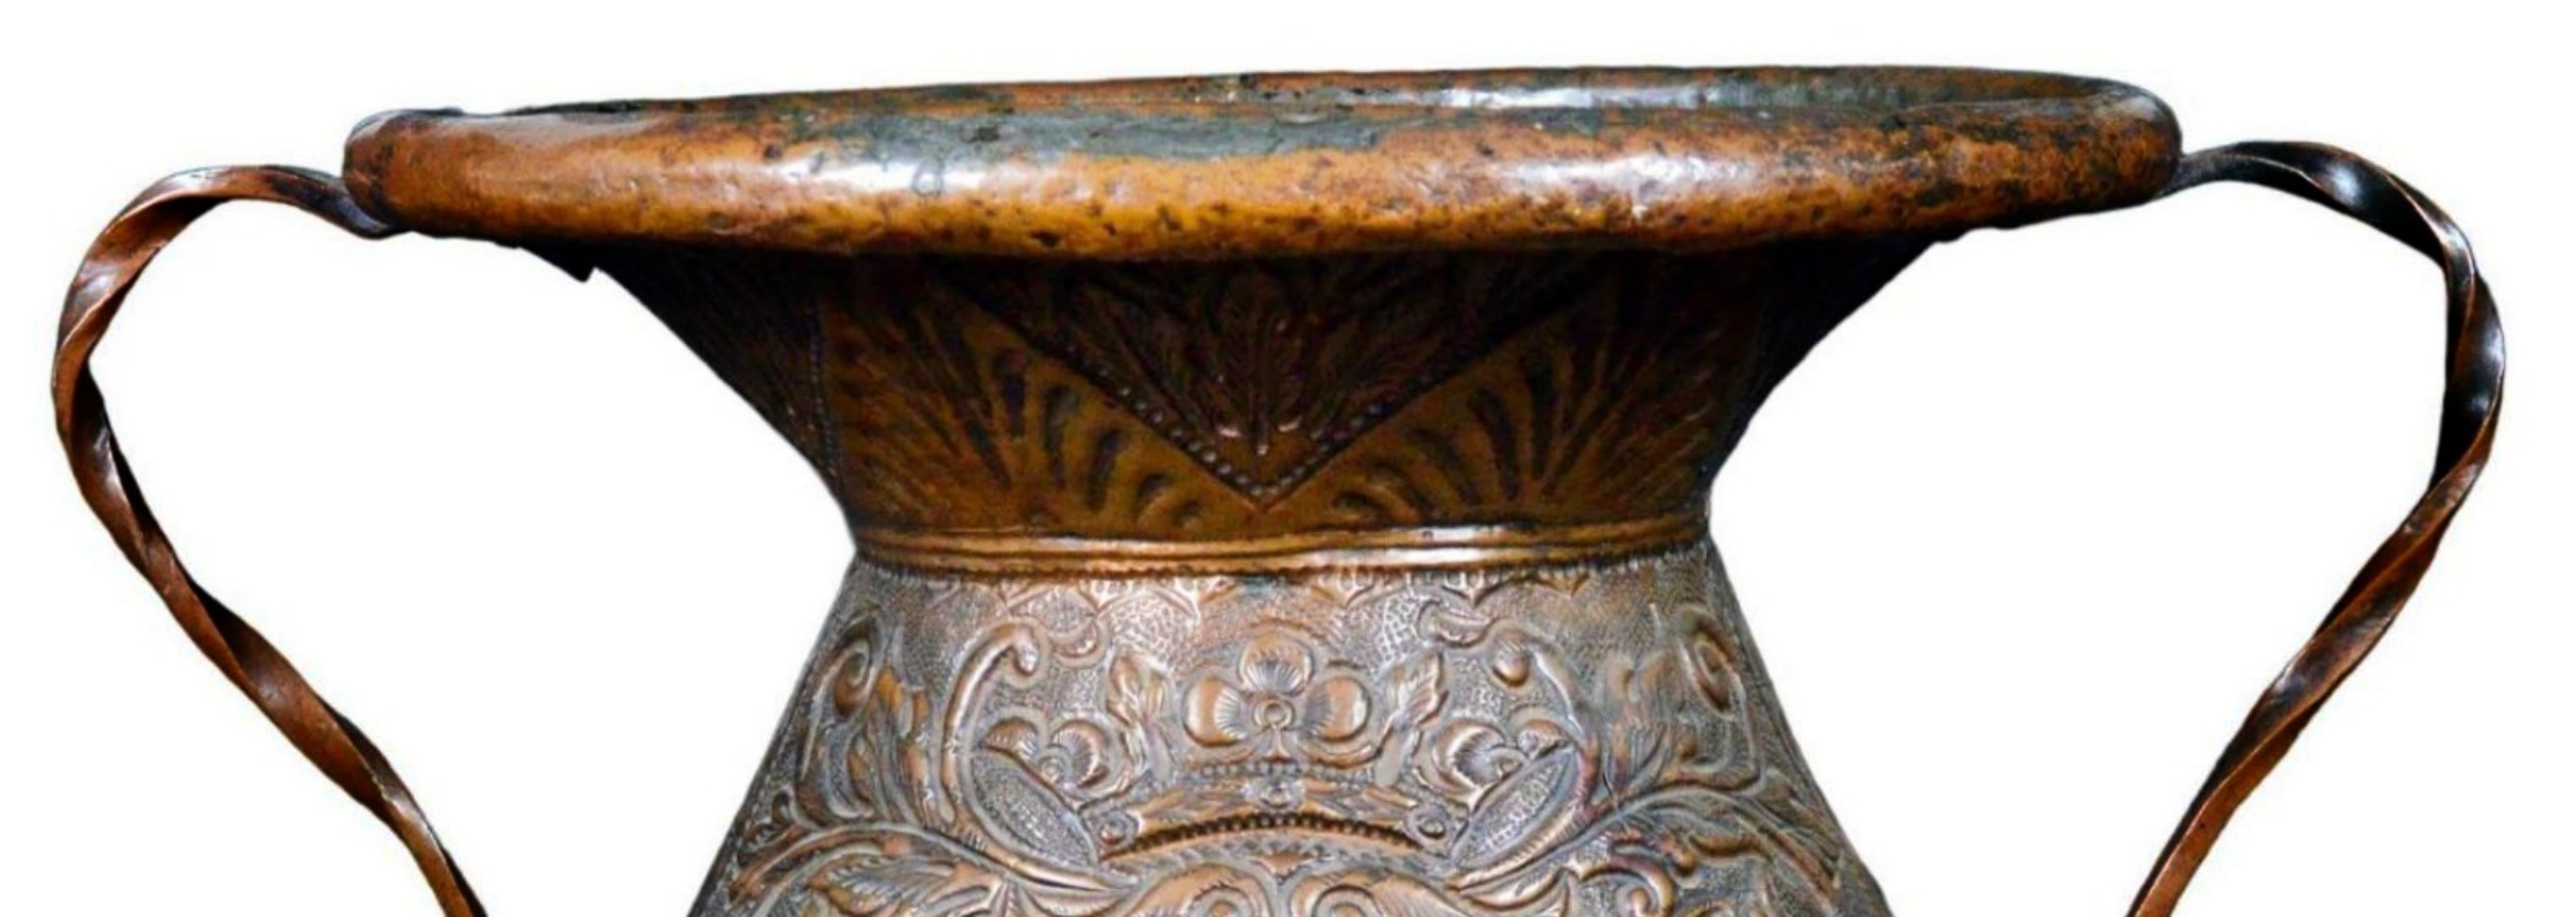 Venetian vase 17th Century

in finely embossed copper with floral motifs in the center of the Venetian Moor profile.
Venice 17th century.
h cm 32 x D 46
Condition: wear of time.